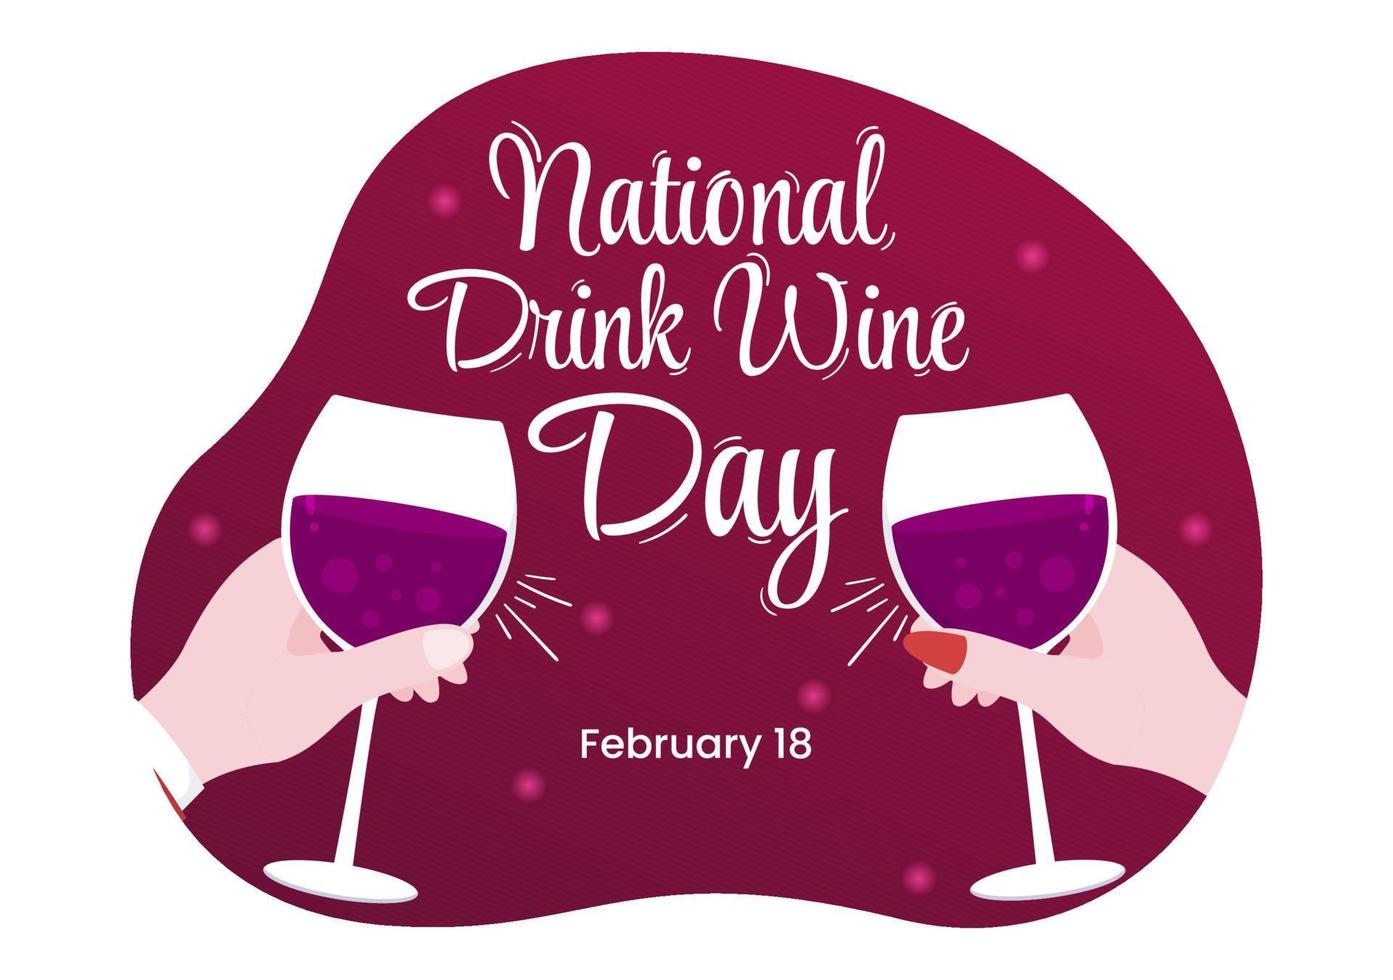 National Drink Wine Day on February 18 with Glass of Grapes and Bottle in Flat Style Cartoon Hand Drawn Background Templates Illustration vector